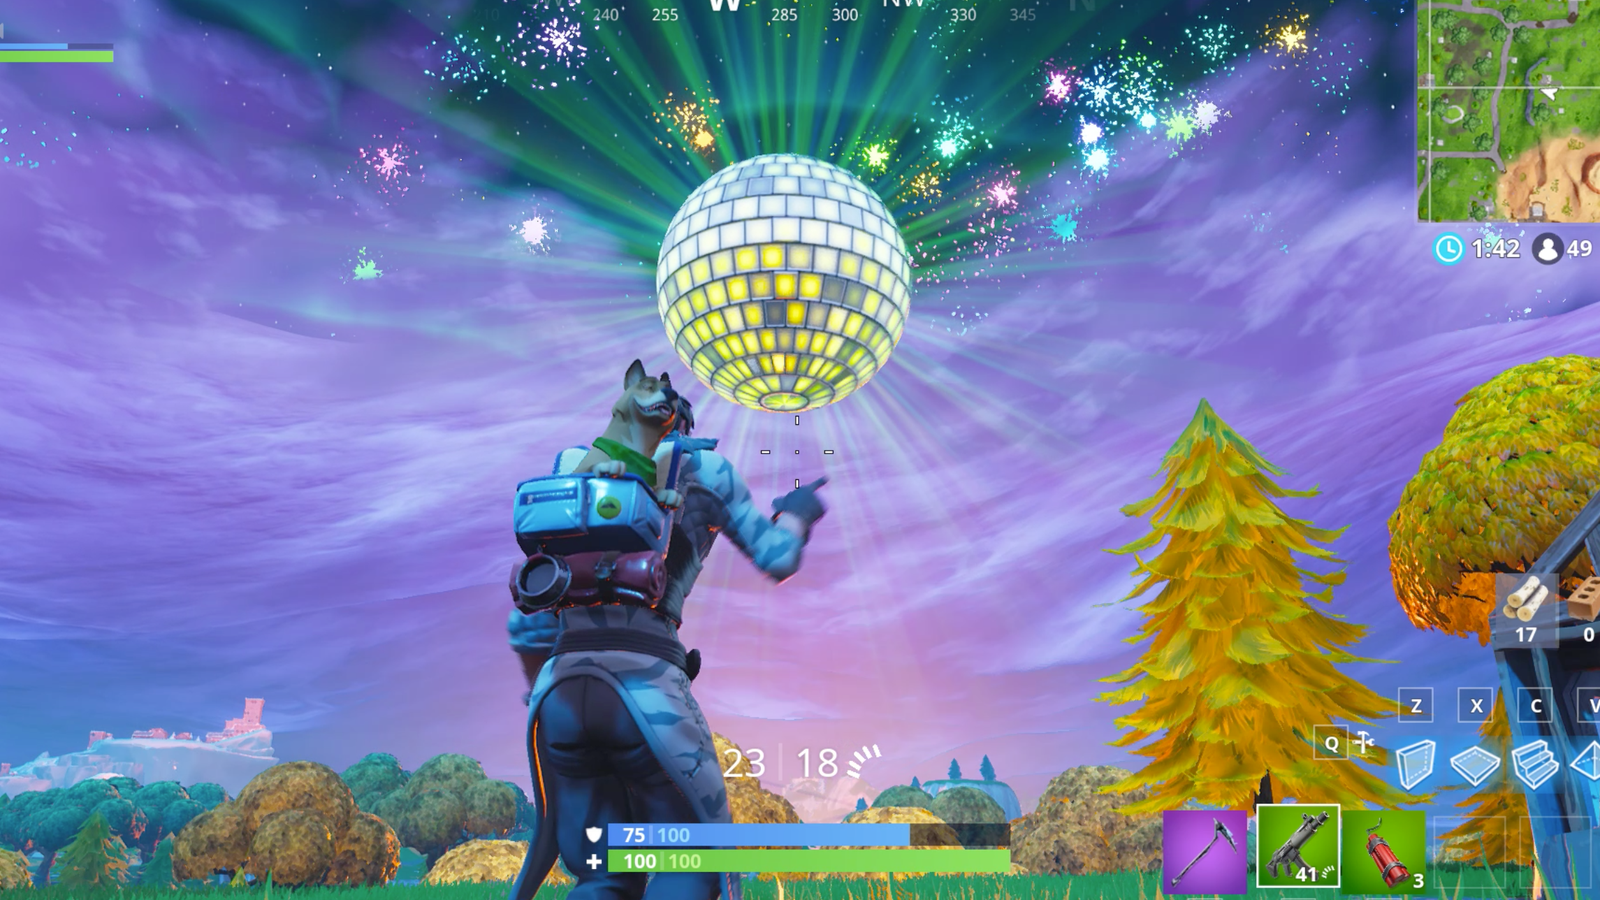 Fortnite S New Year’s Eve Event Catches Some Players By